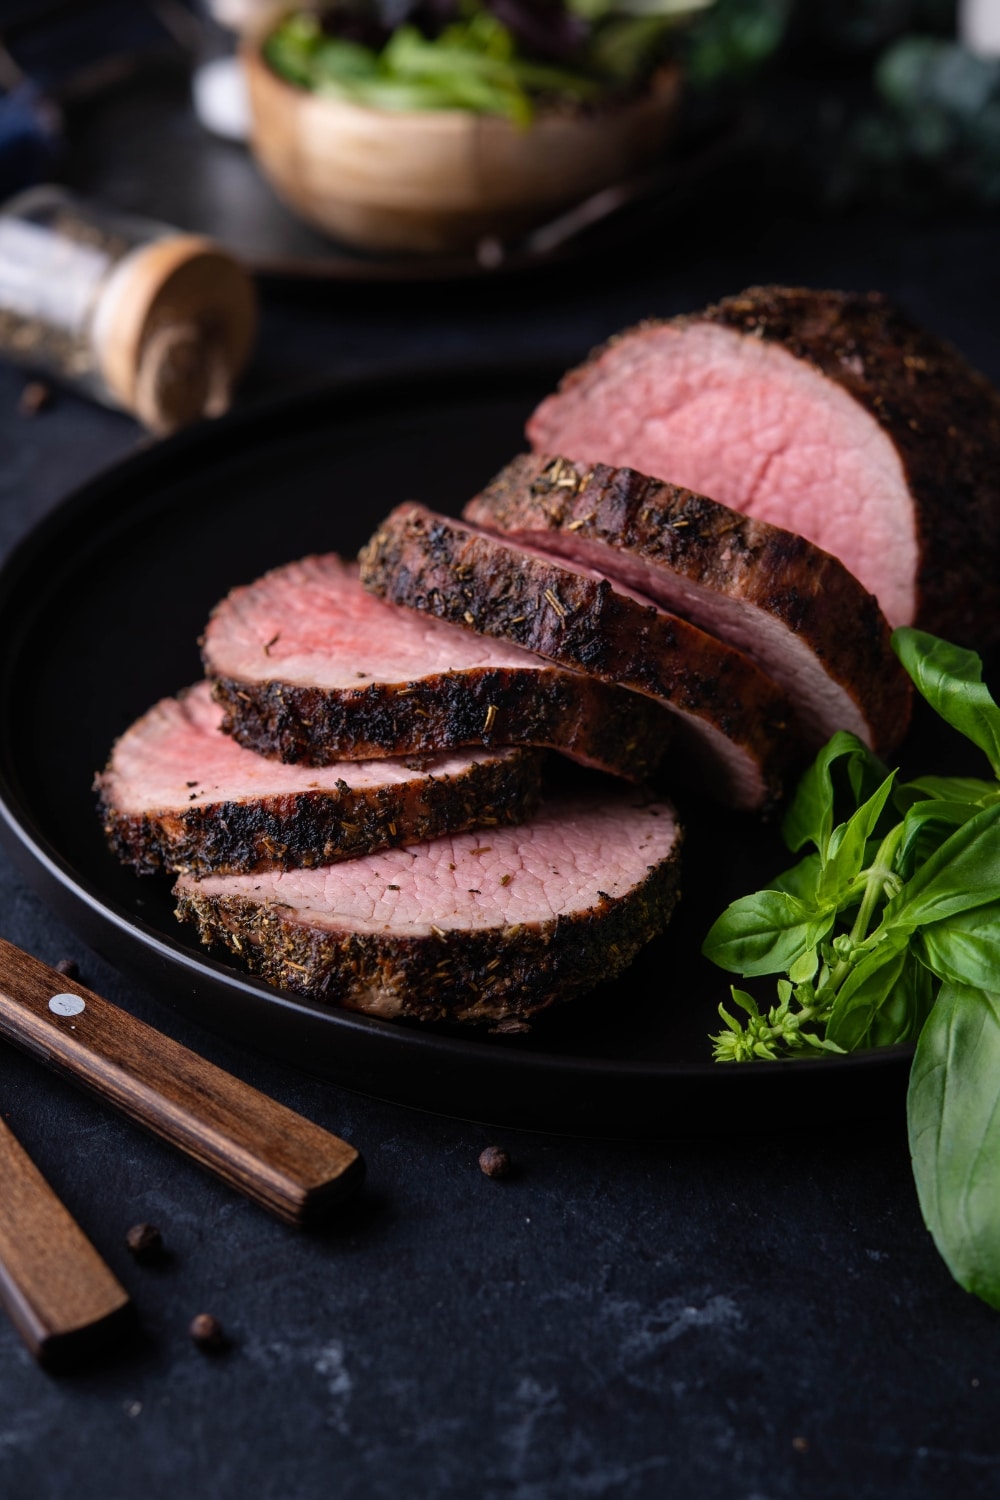 Medium rare grilled beef tenderloin, served and served on a black plate with basil leaves.